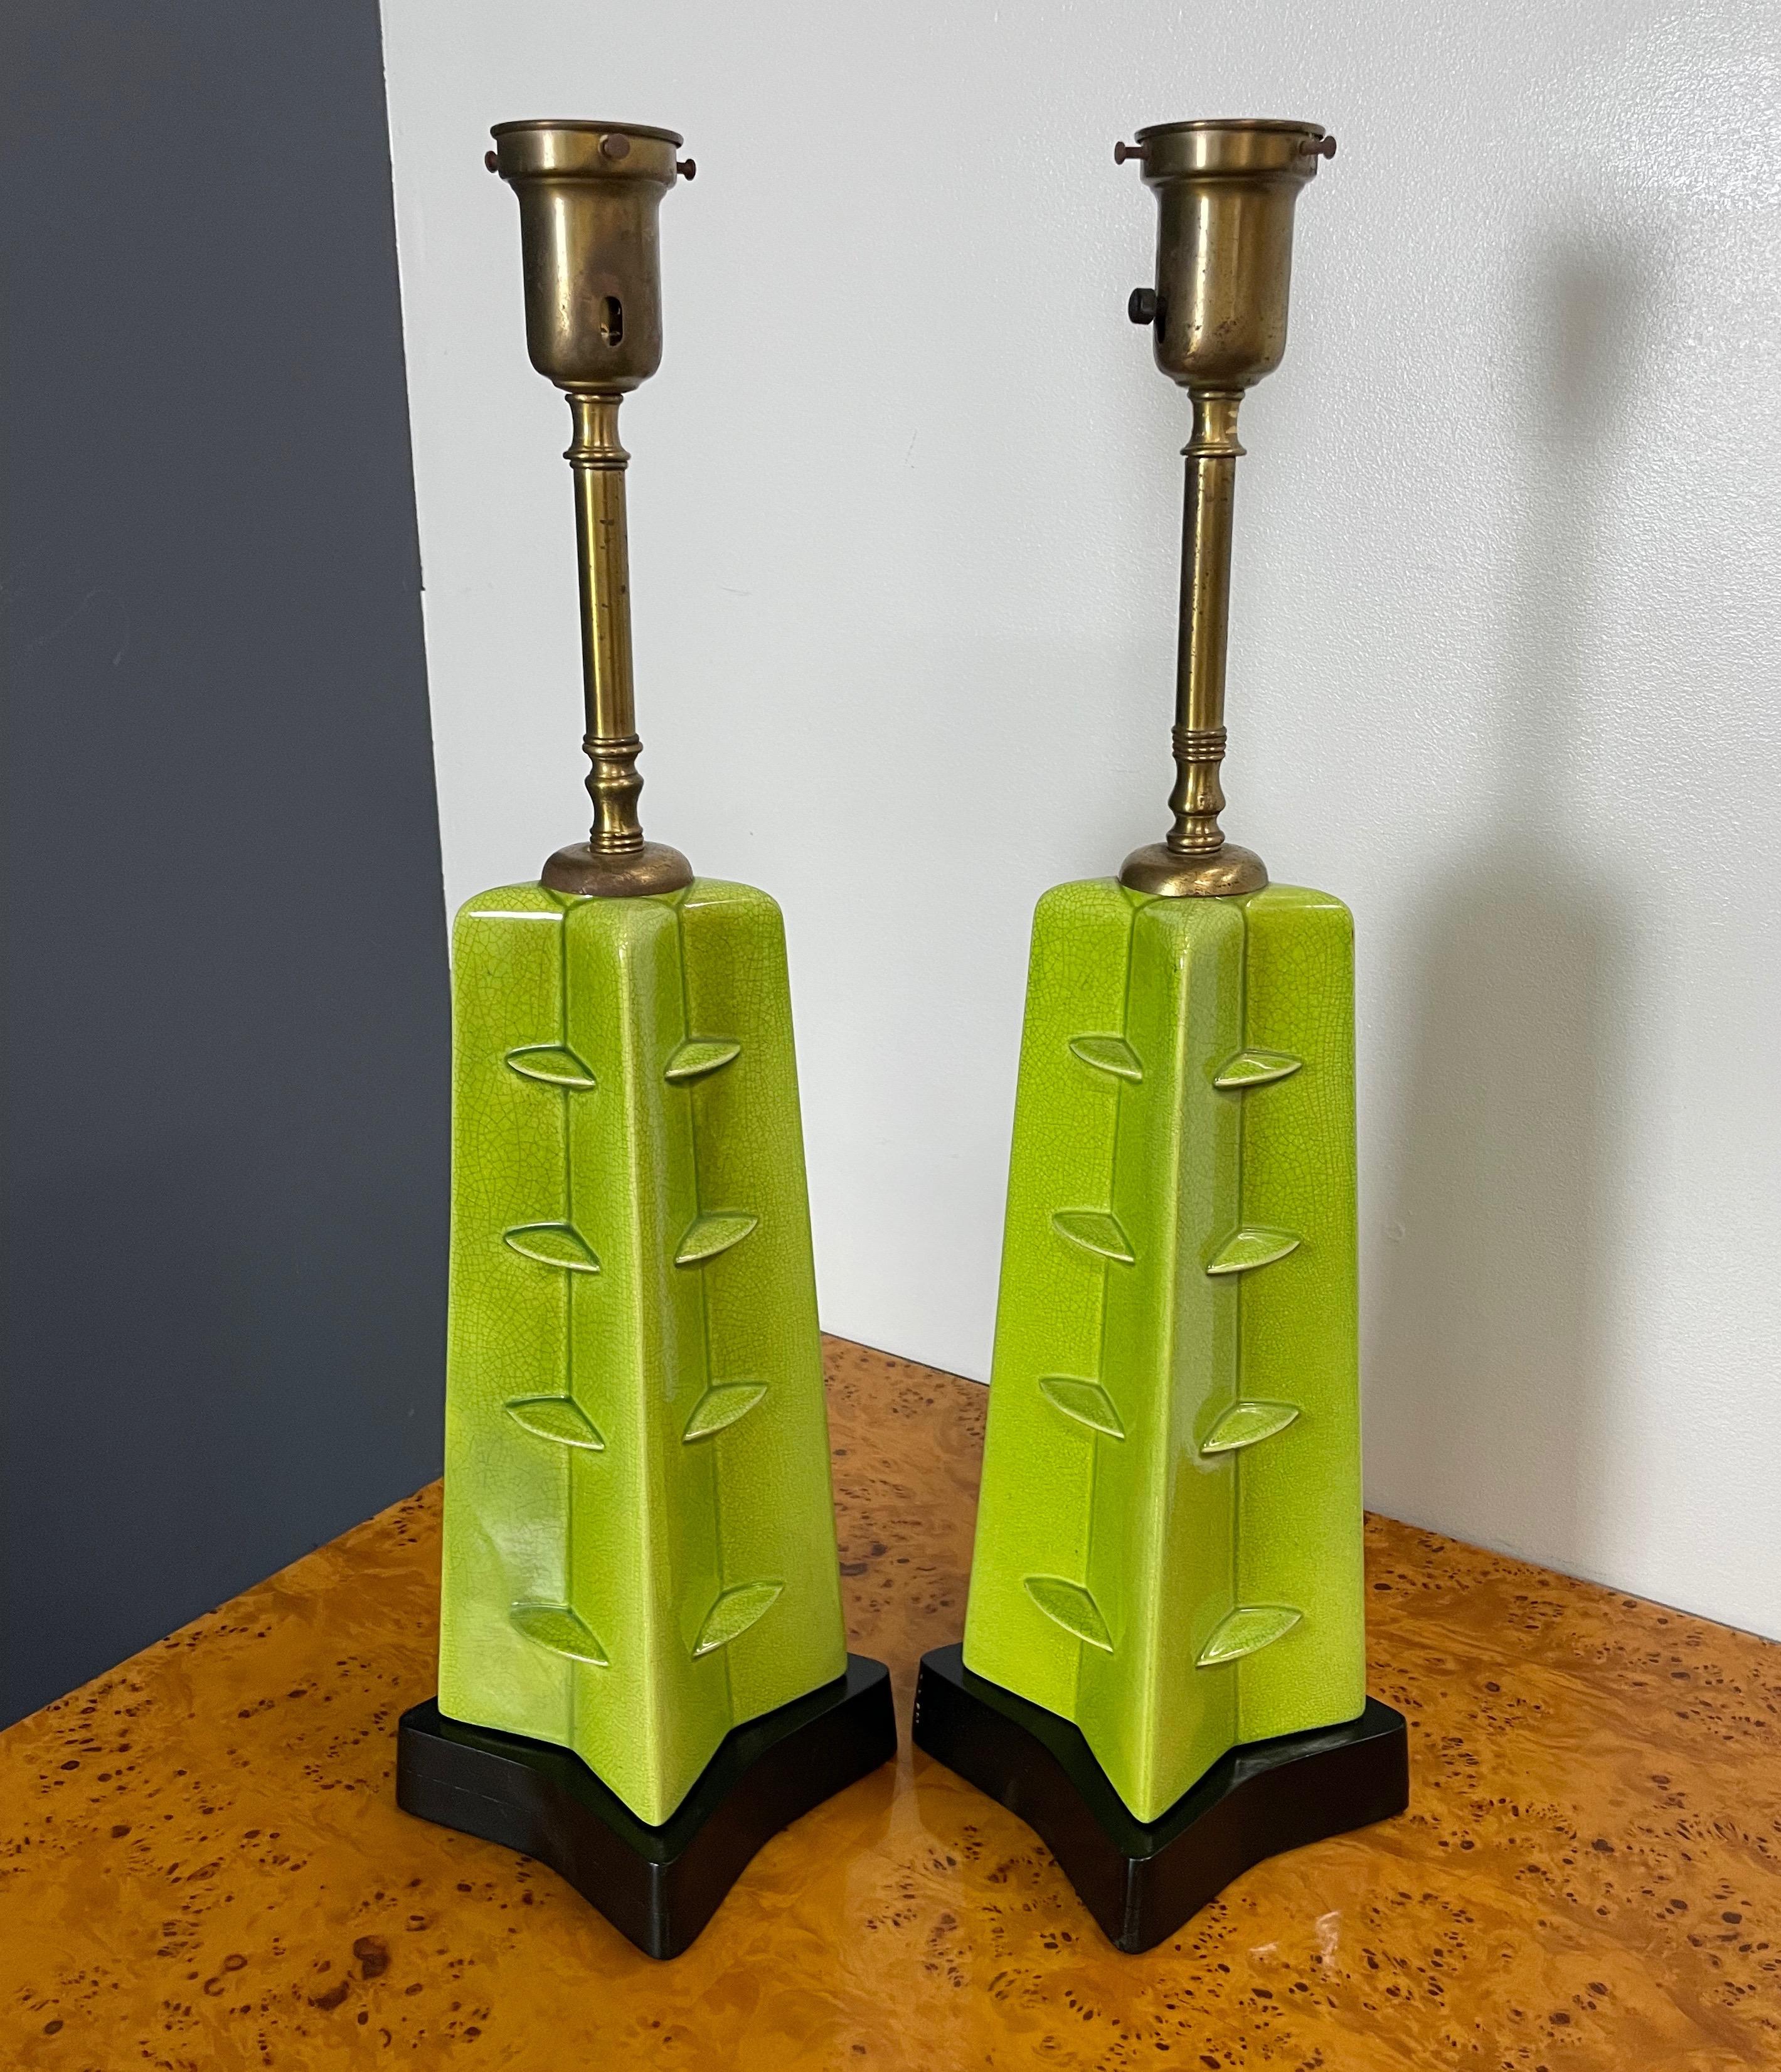 These wonderful ceramic lamps are a towering presence with their unusual chartreuse crackle glaze and their wooden base that mirrors the shape of the ceramic.